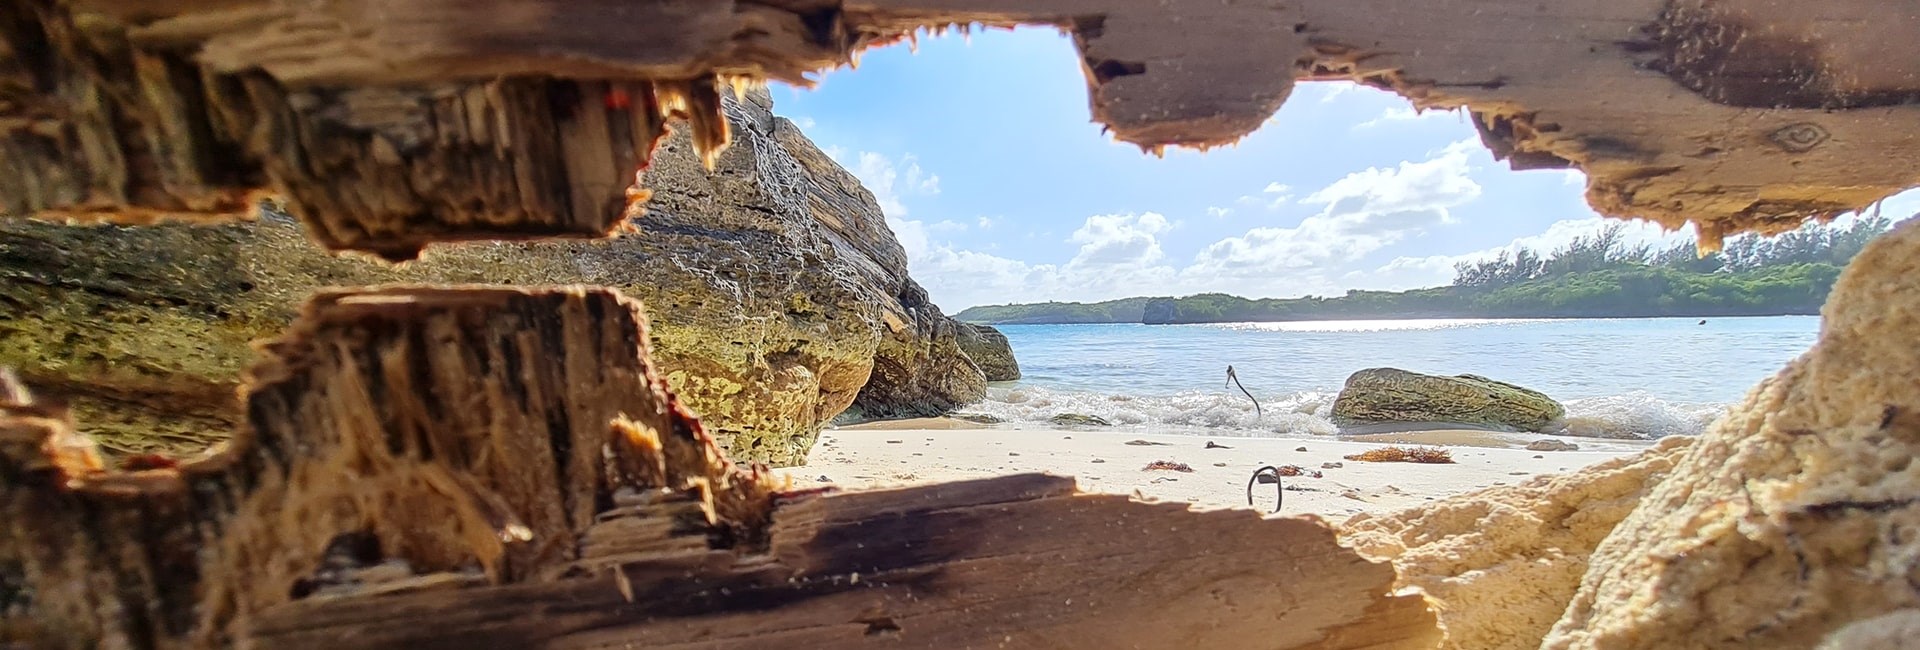 View of tropical beach and sea from the inside of a cave with jagged rock formations